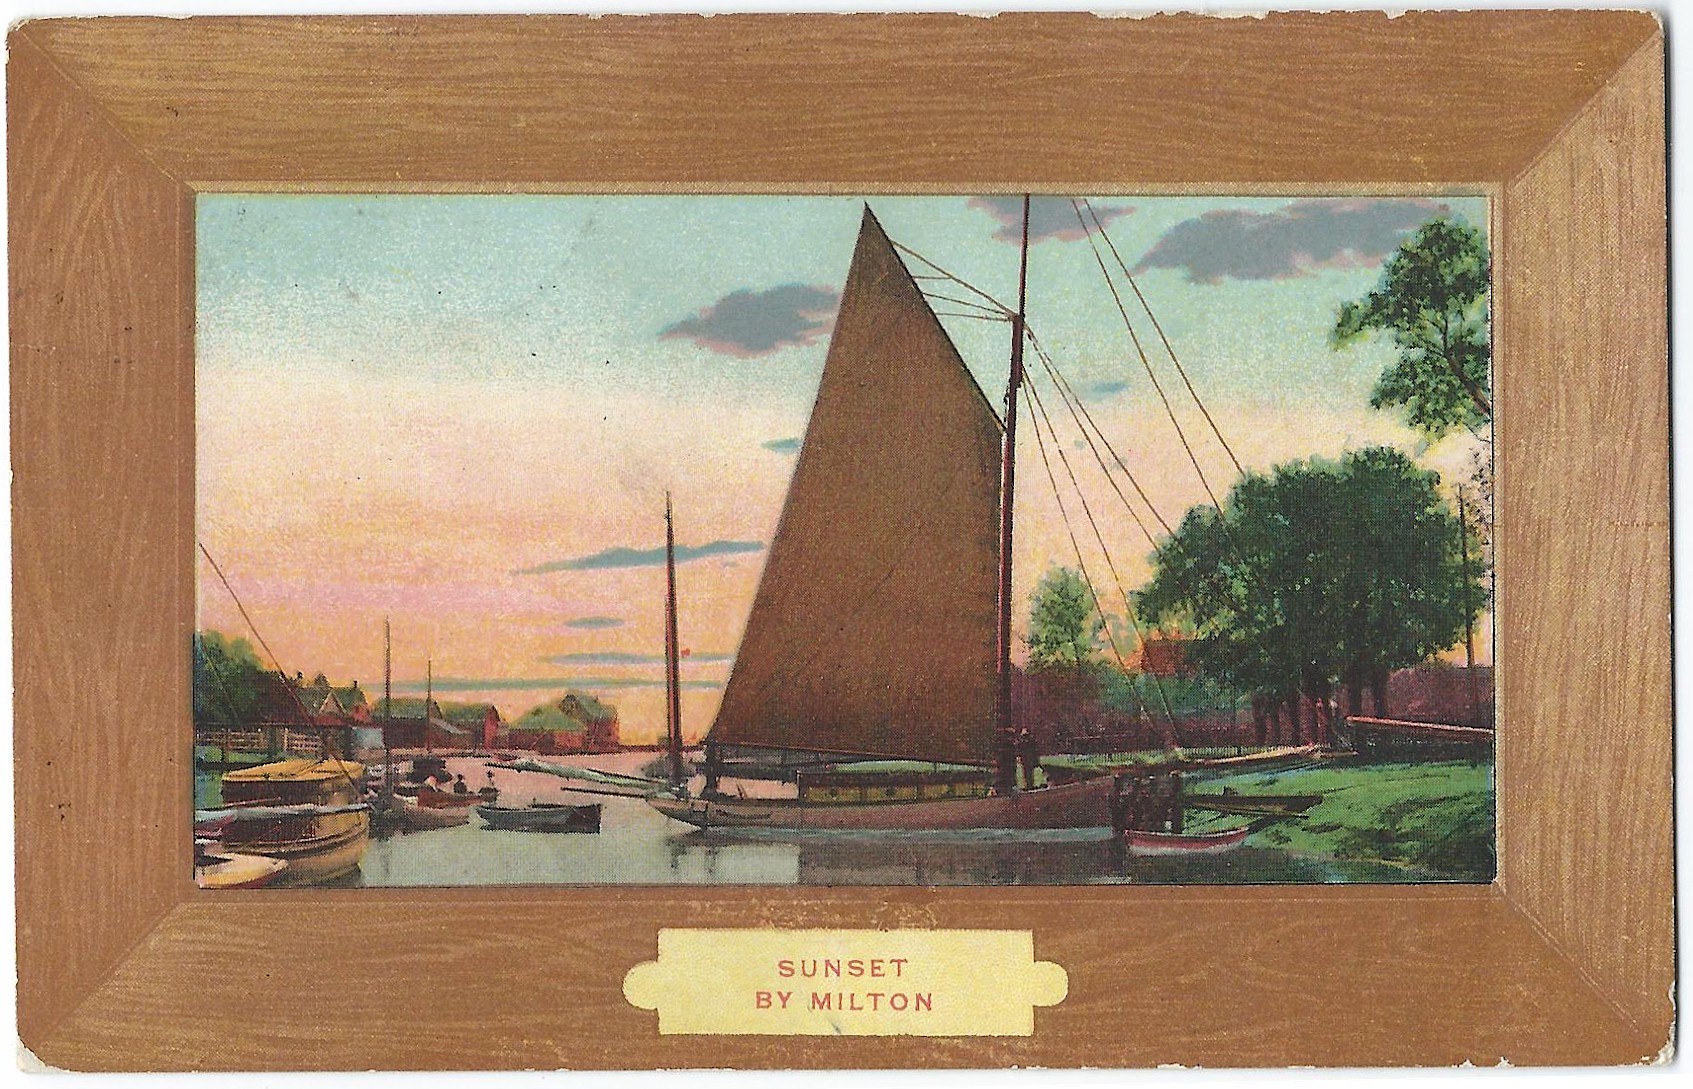 SUNSET by Milton - Sailboat Postcard - Postmarked 1911